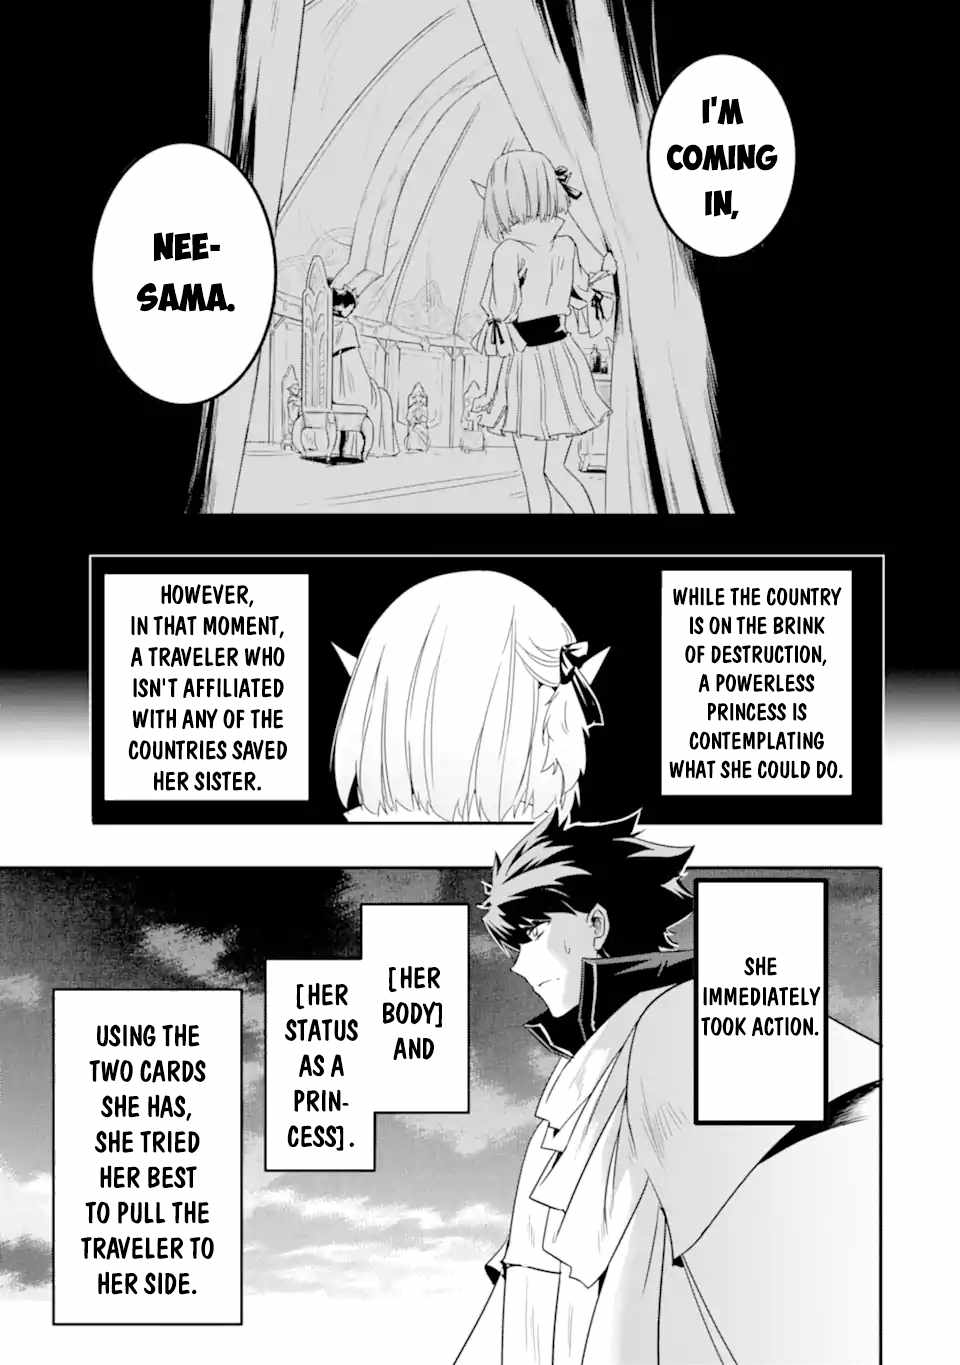 Another World Nation Archimaira: The Weakest King and his Unparalleled Army Chapter 5-3-eng-li - Page 12